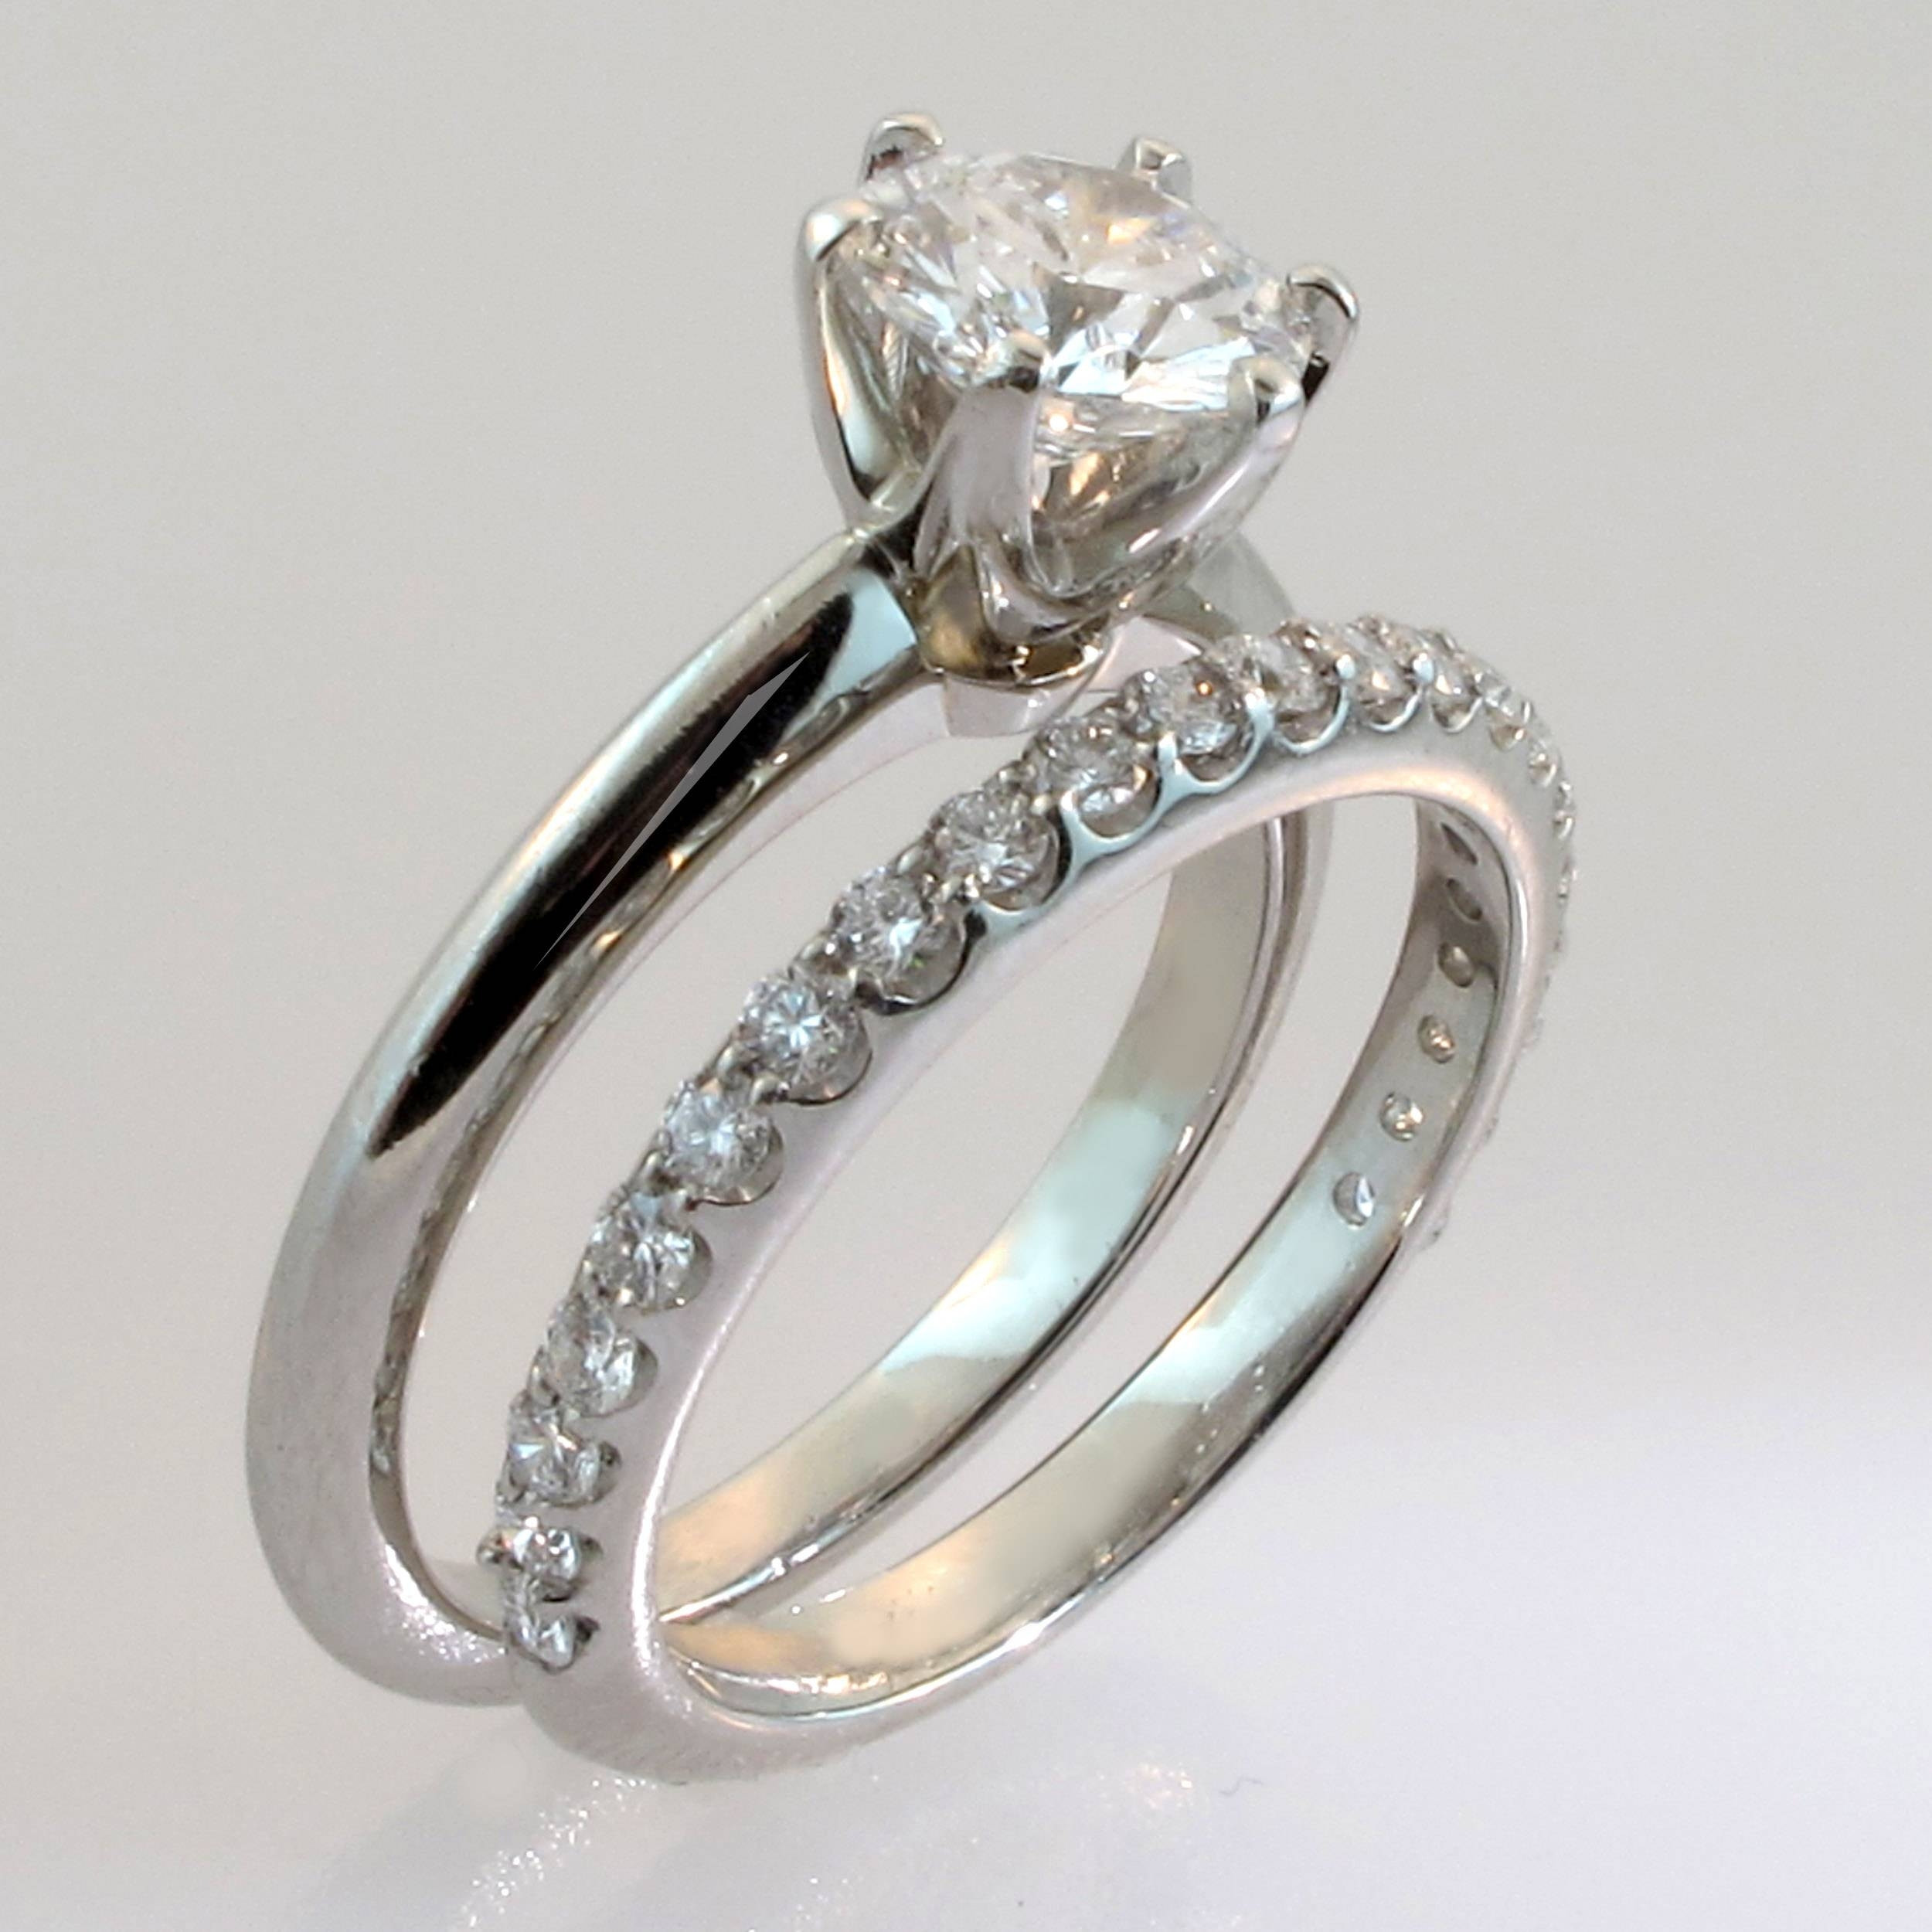 Cheapest Wedding Rings
 15 Collection of Inexpensive Diamond Wedding Ring Sets